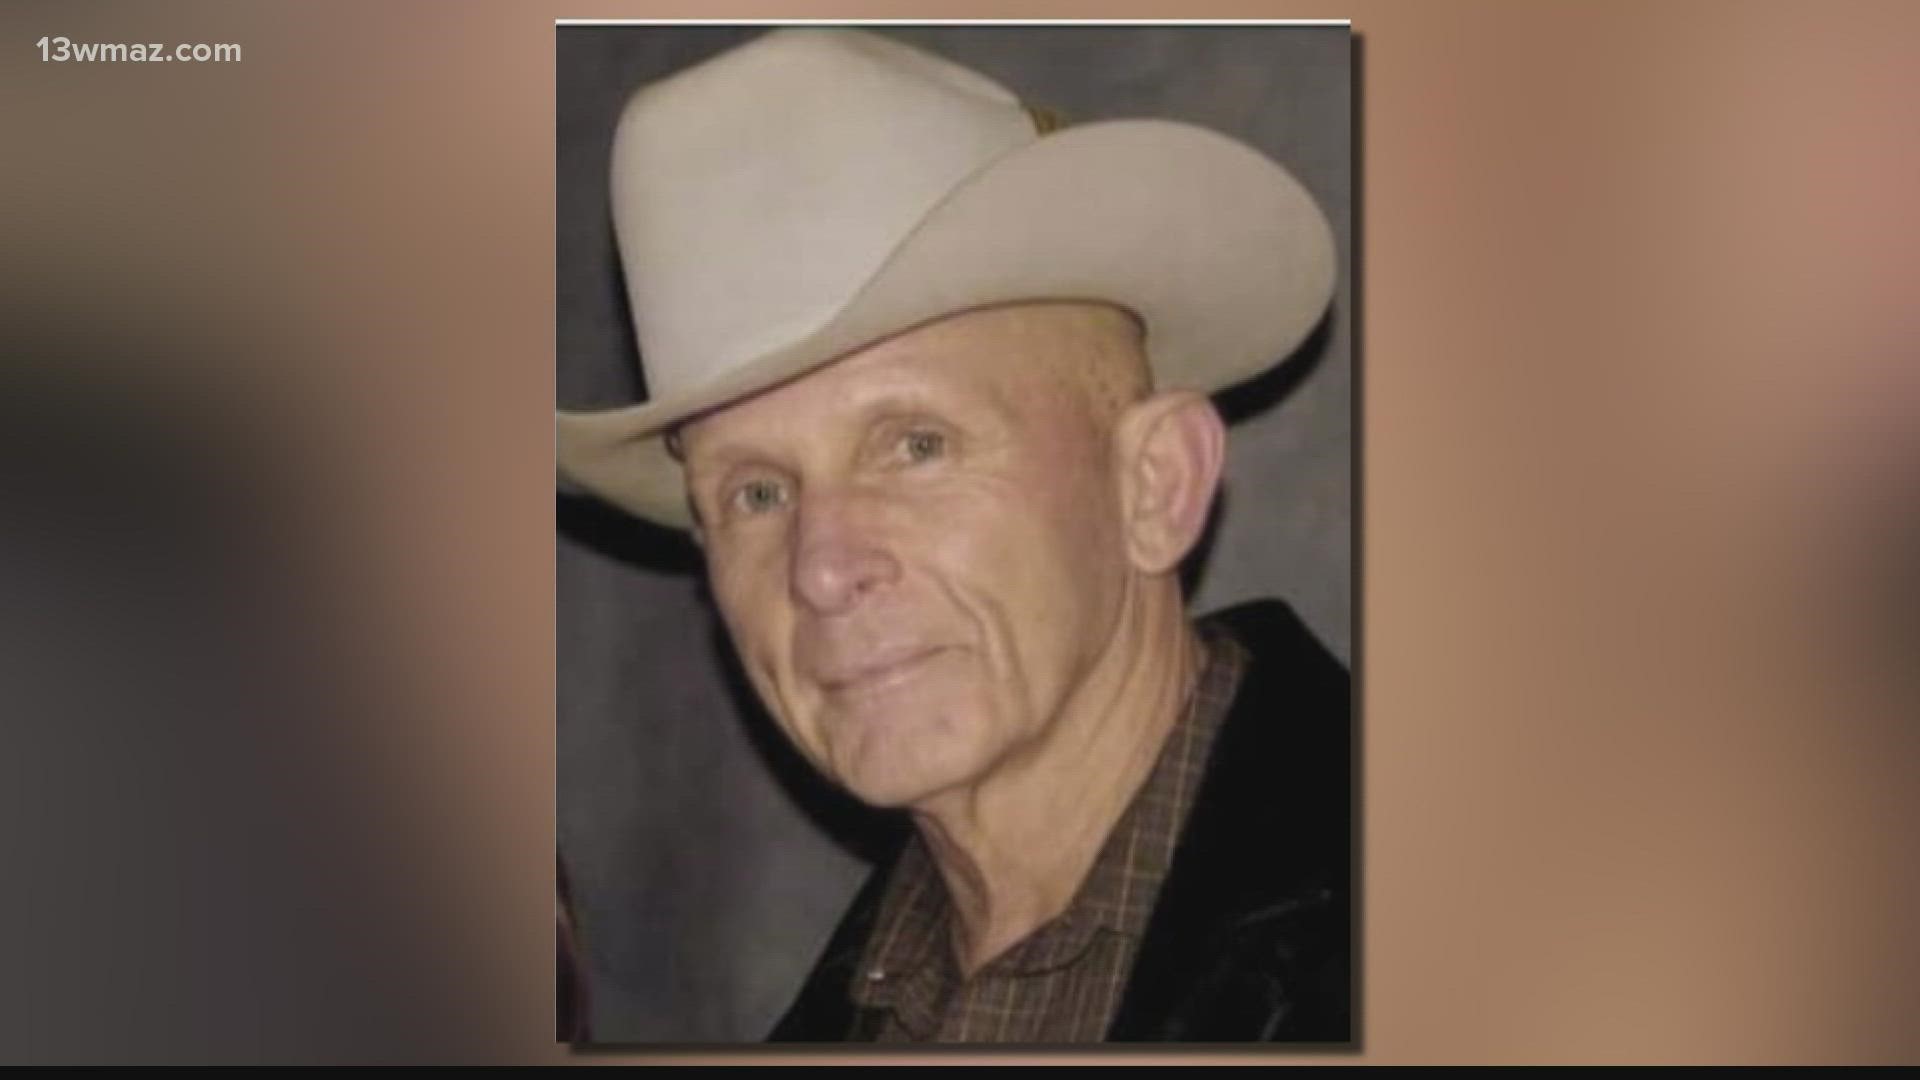 Roy Embry was the owner of Embry Farm Services in Eatonton, Georgia. People in the community say everyone knew him.